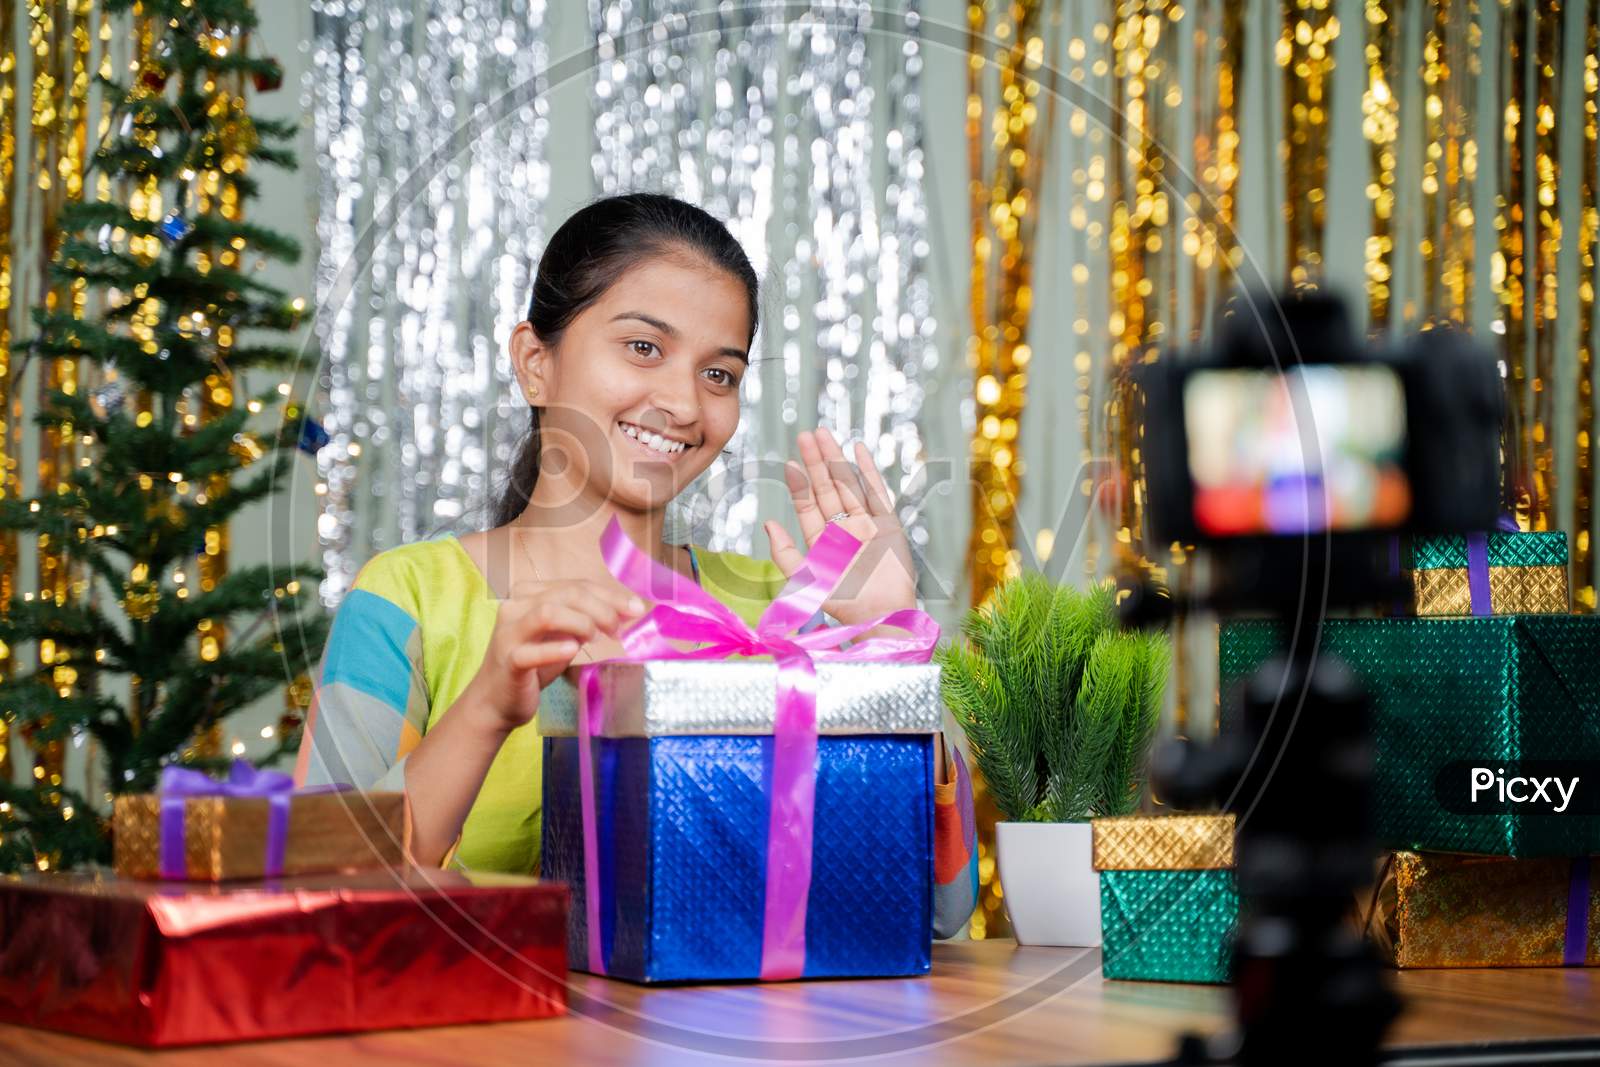 Girl Opening Gift In Front Of Camera During Christmas Eve - Concept Of Vlogging, Girl Got Gift Or Present From Subscribers During Holyday Season.